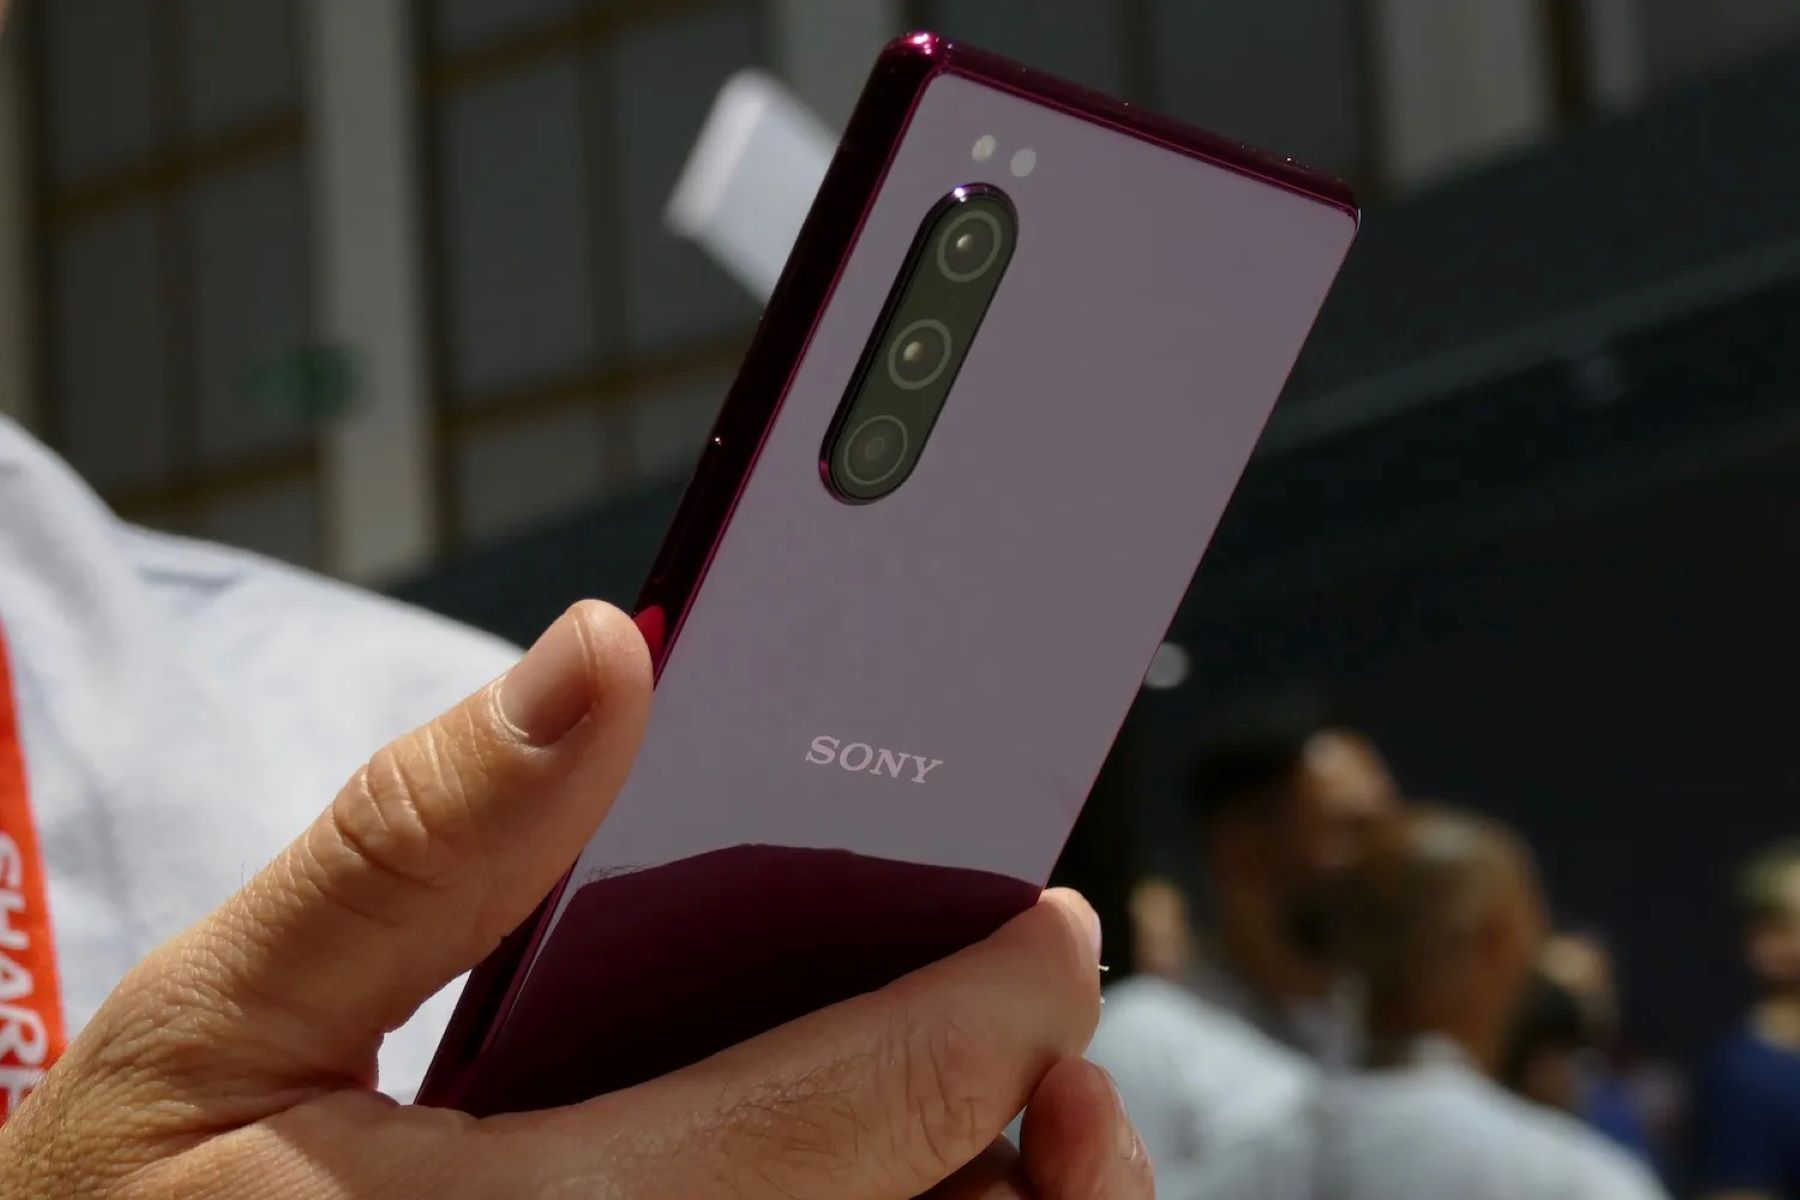 Analyzing Factors Behind Lack Of Success For Sony Xperia Phones